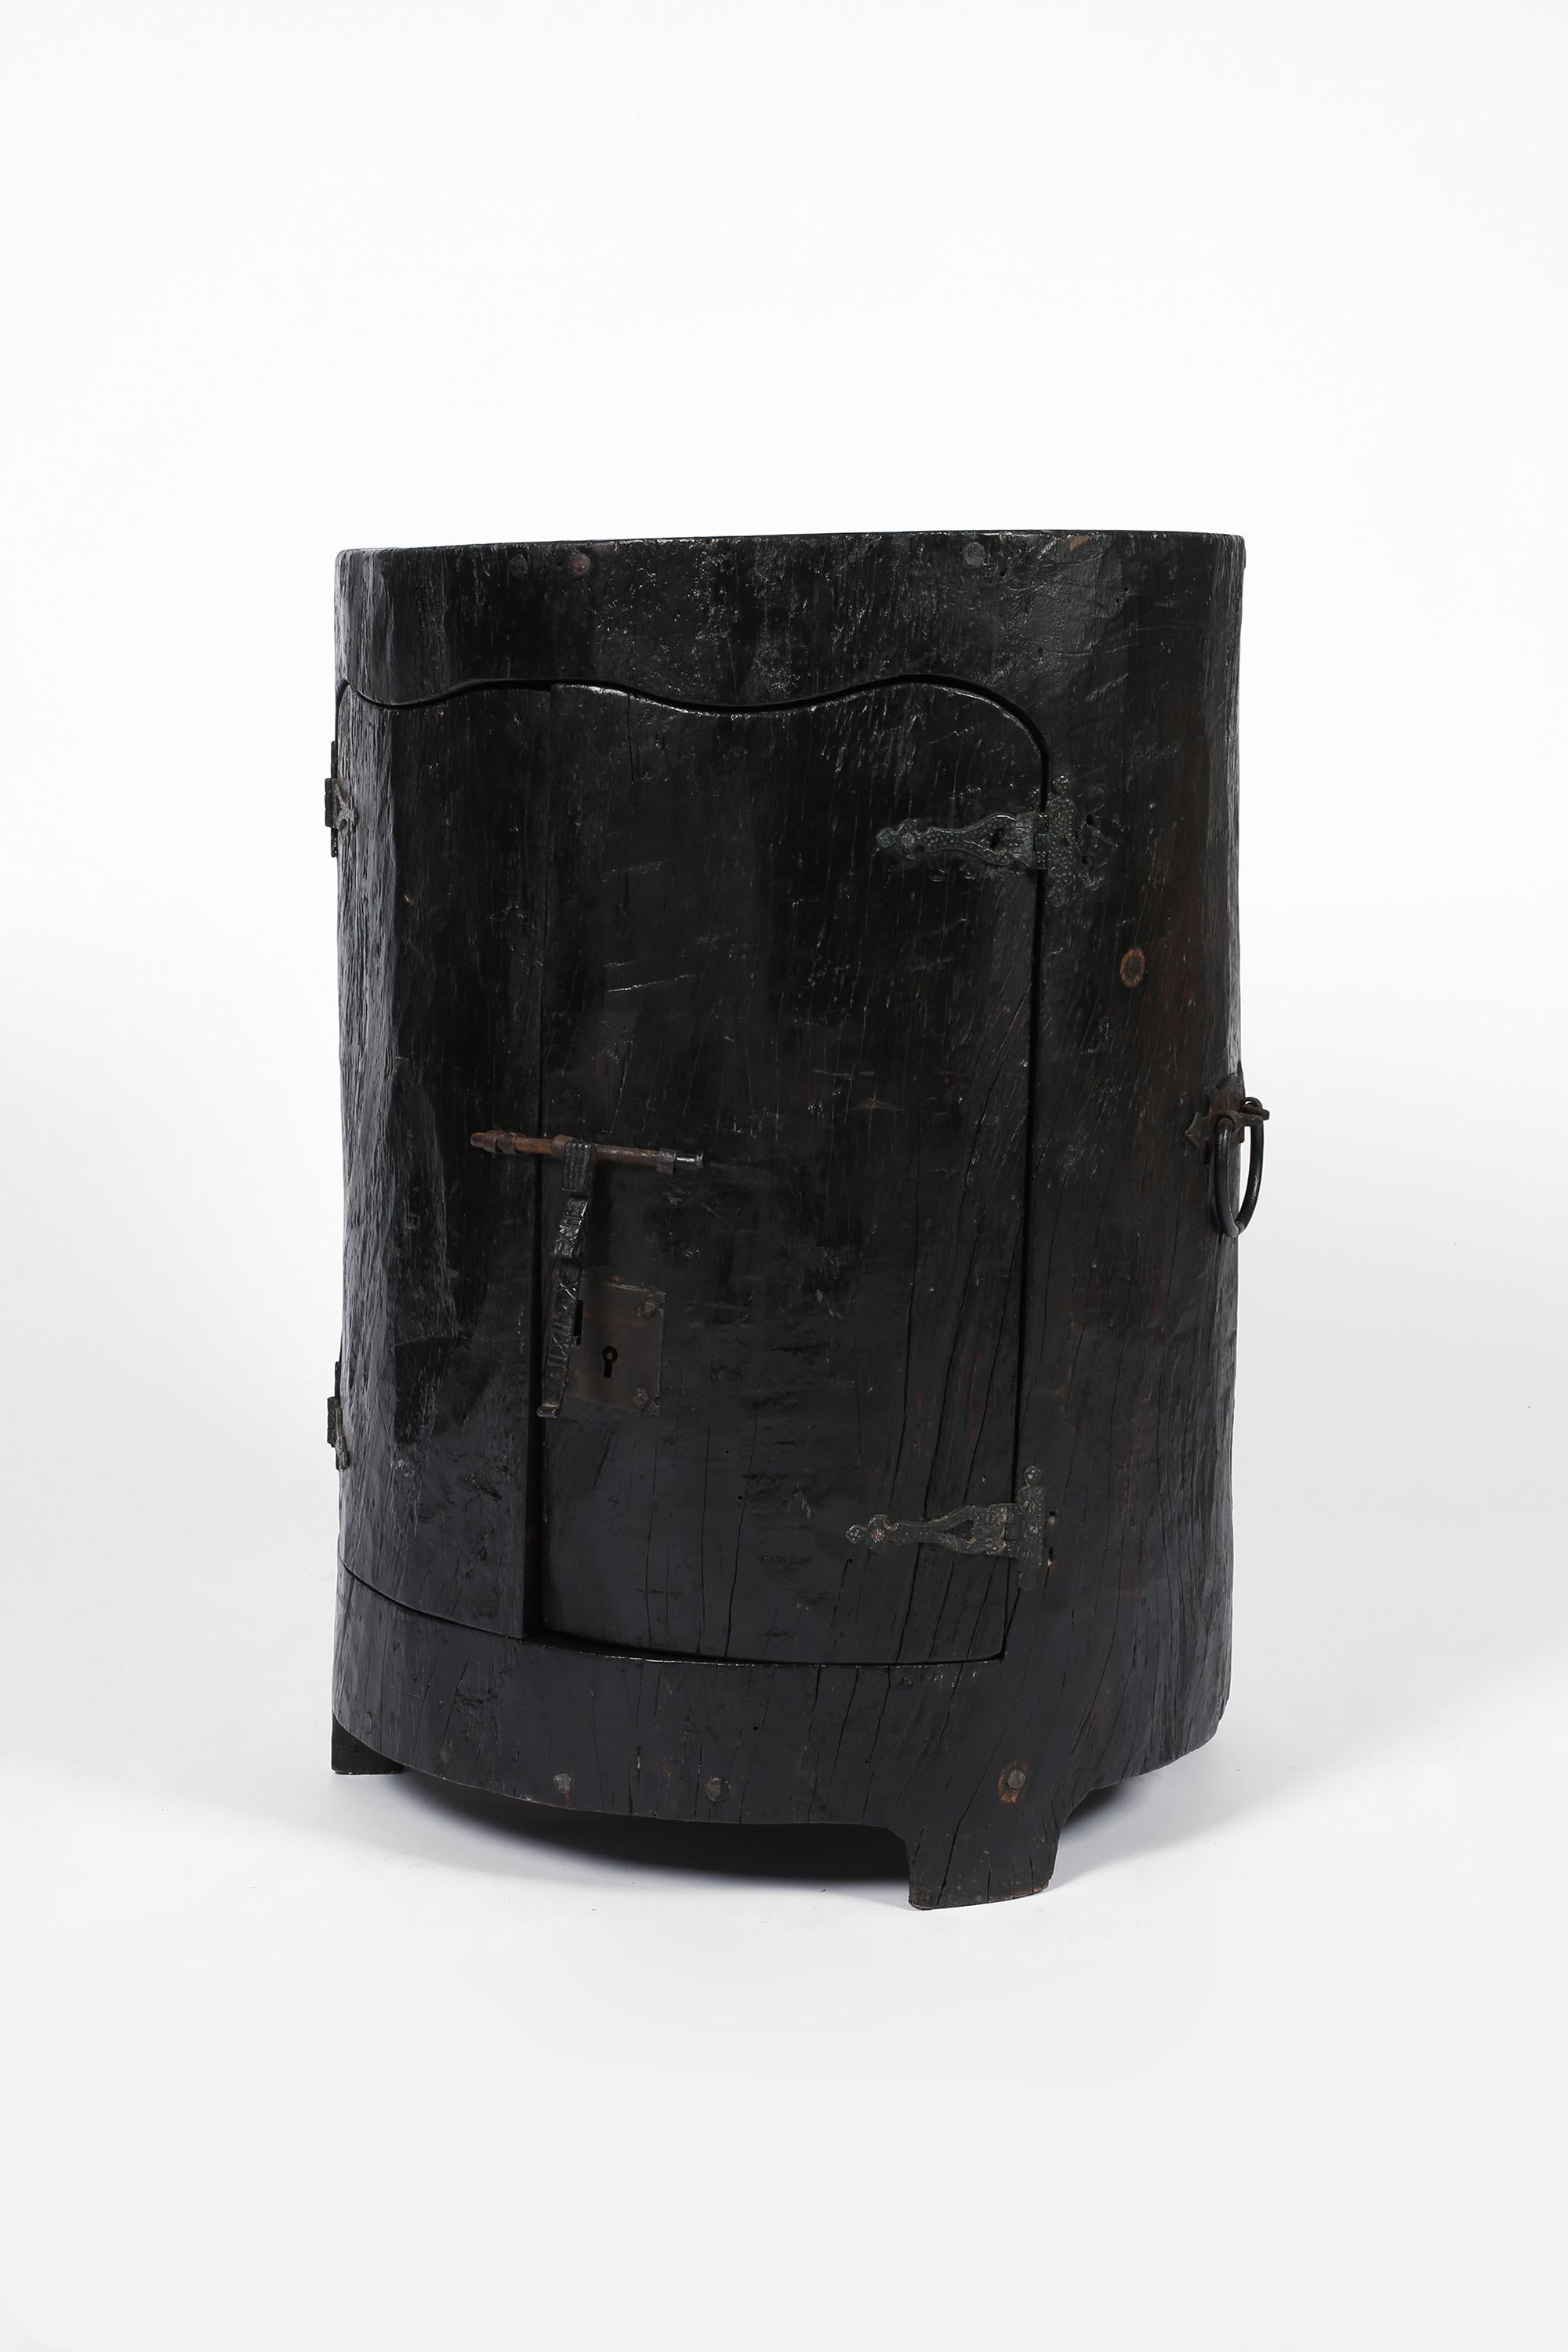 A low dug-out folk-art cupboard formed from a hollowed out and ebonised chestnut trunk. Featuring decorative forged iron hardware, the two shaped doors open to reveal a single shelf within. Portuguese, early-mid 20th century.